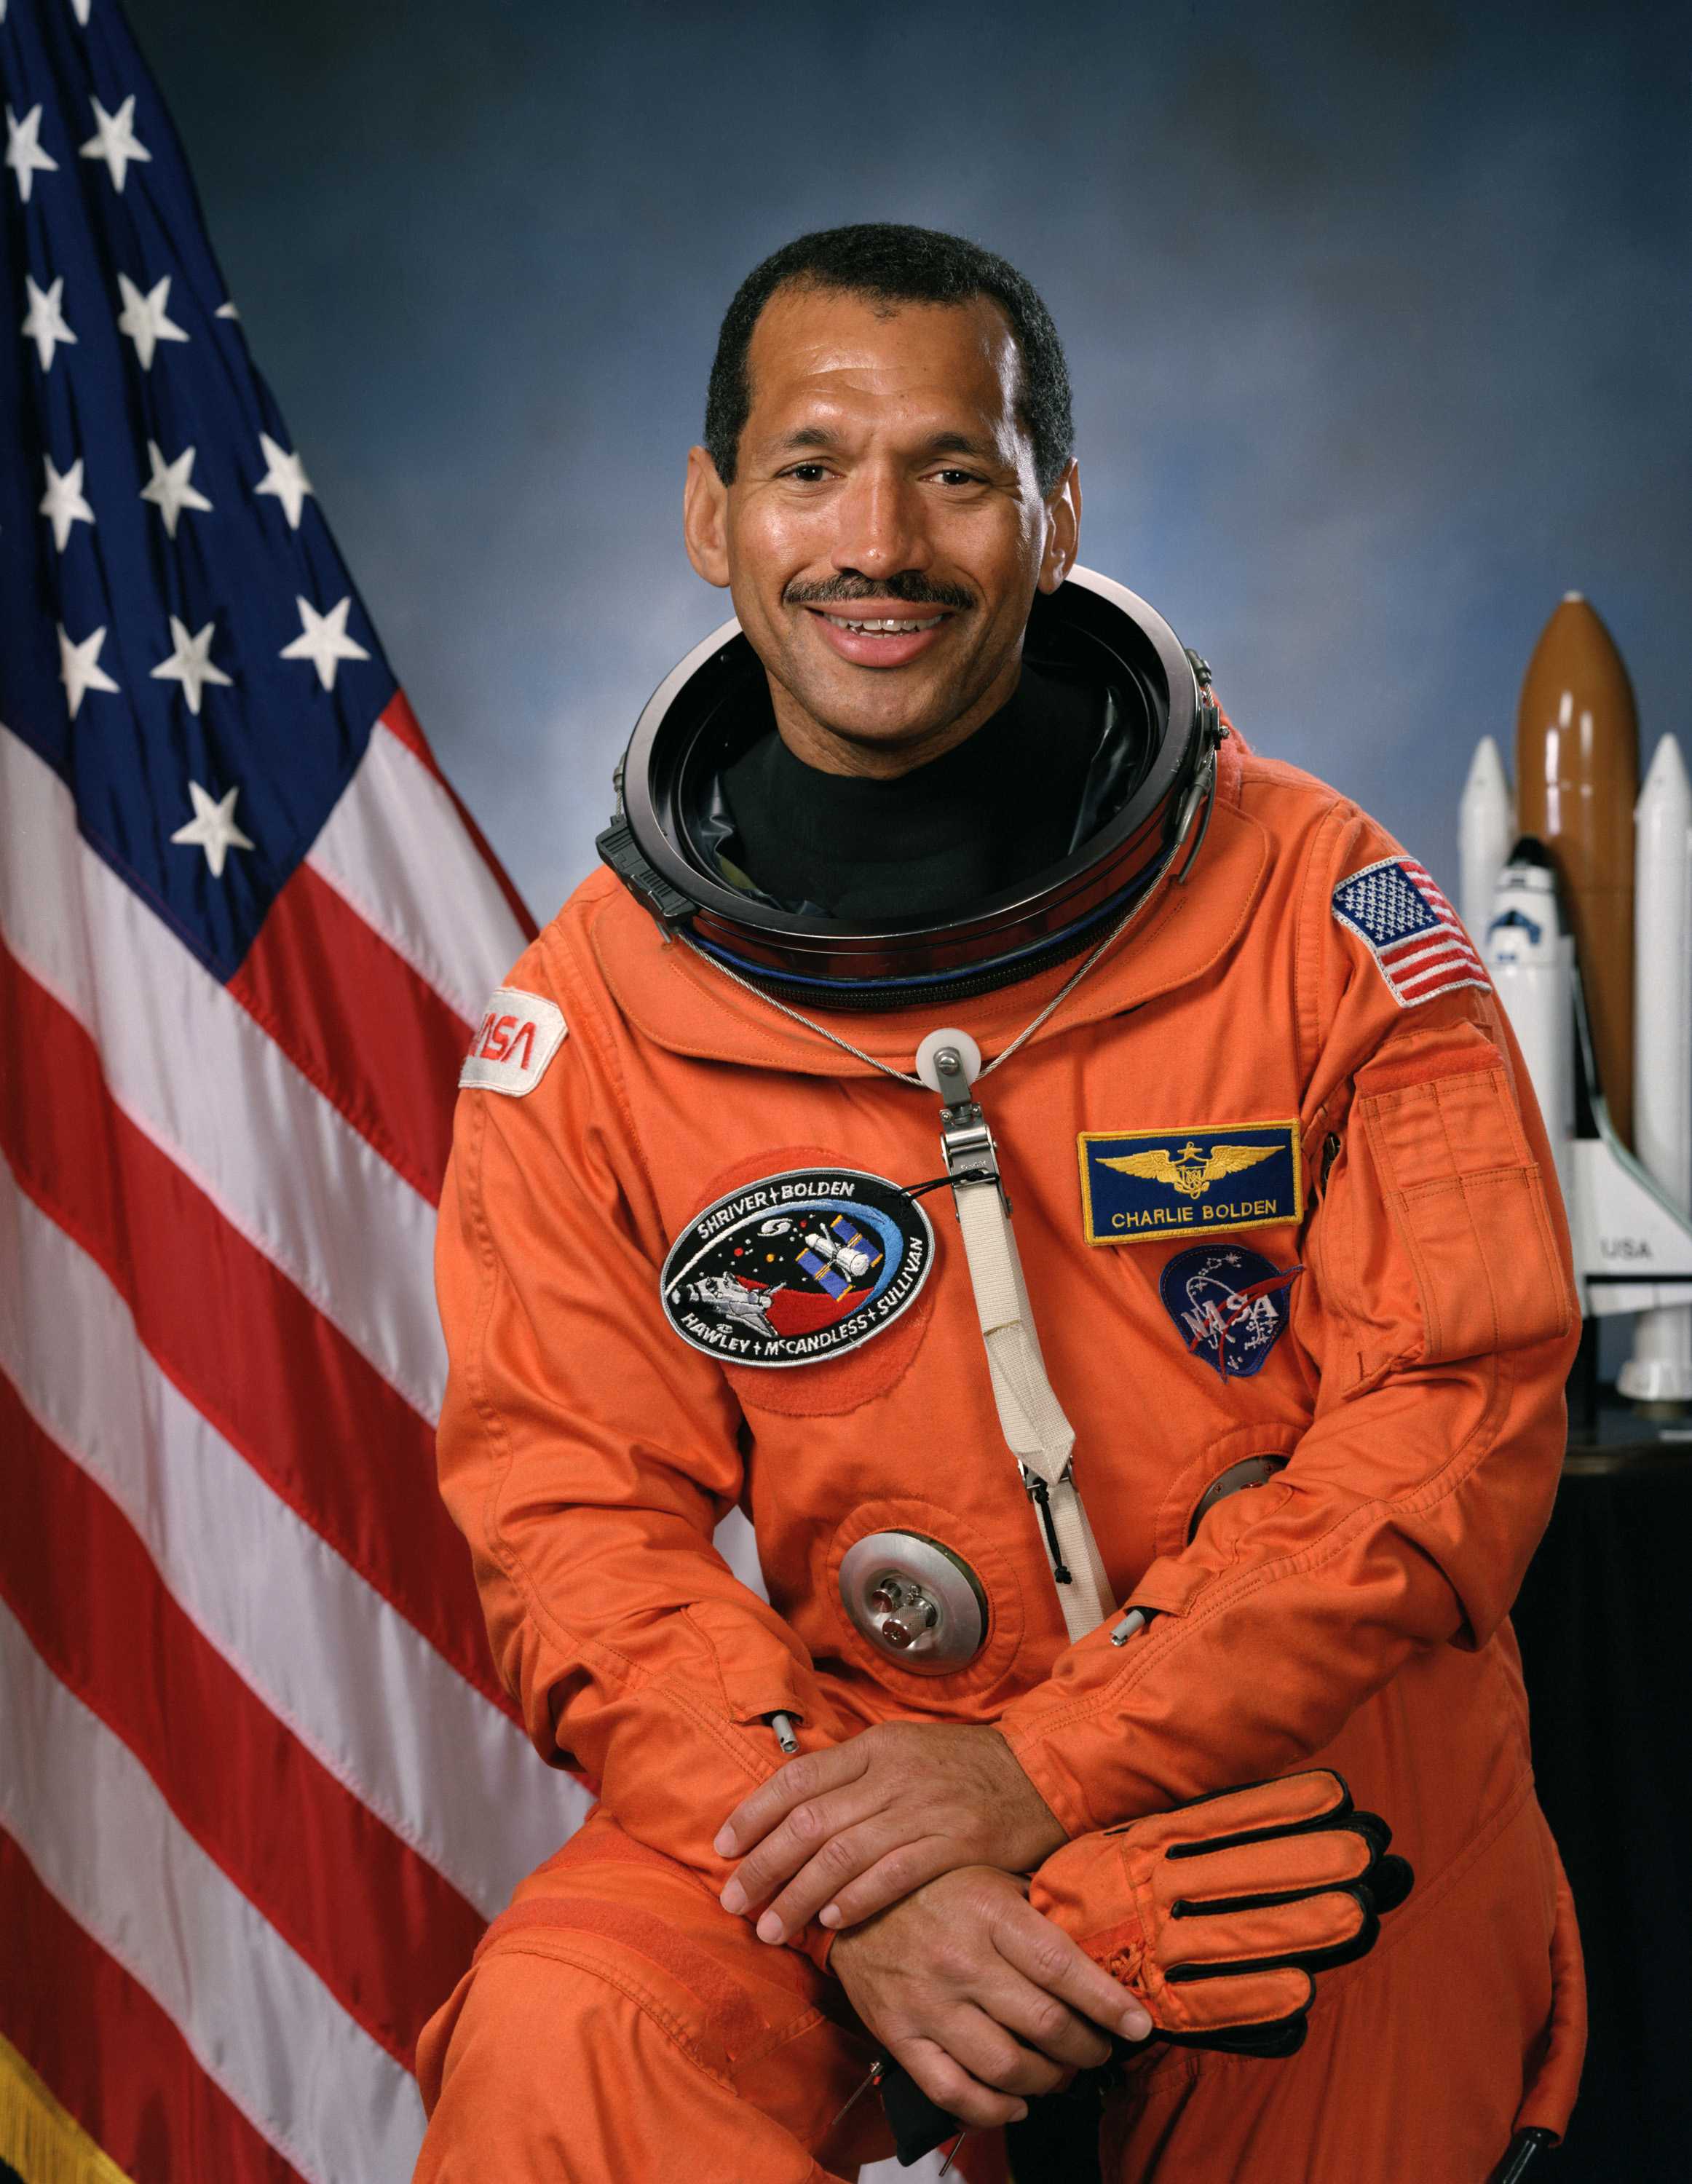 Bolden is wearing an orange space suit while sitting and smiling for his portrait.